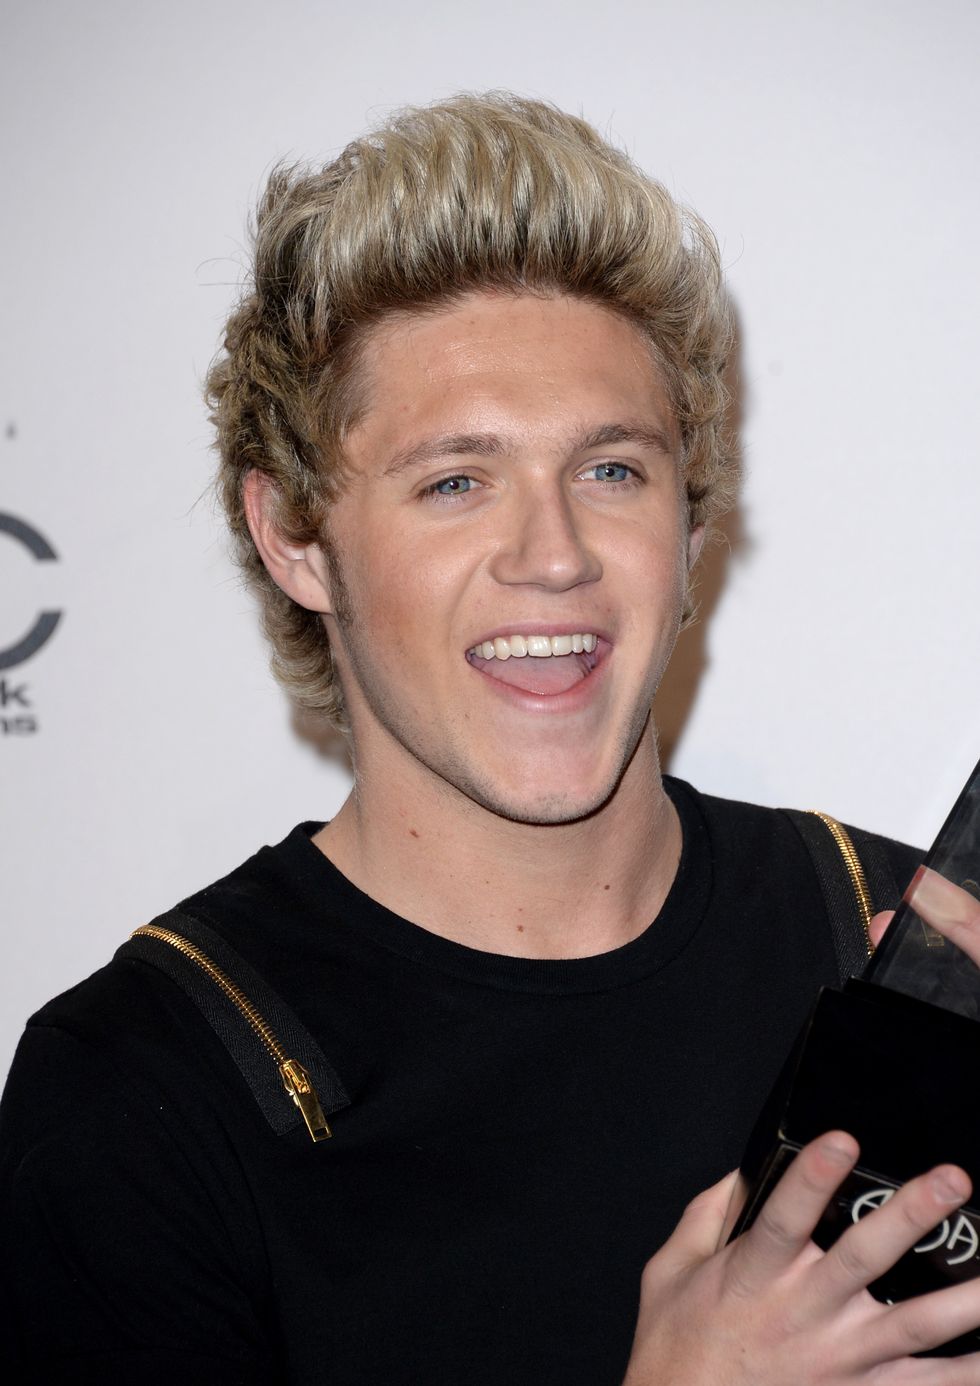 Niall Horan Might Have Dyed His Hair Blonde and His Fans Are Freaking Out